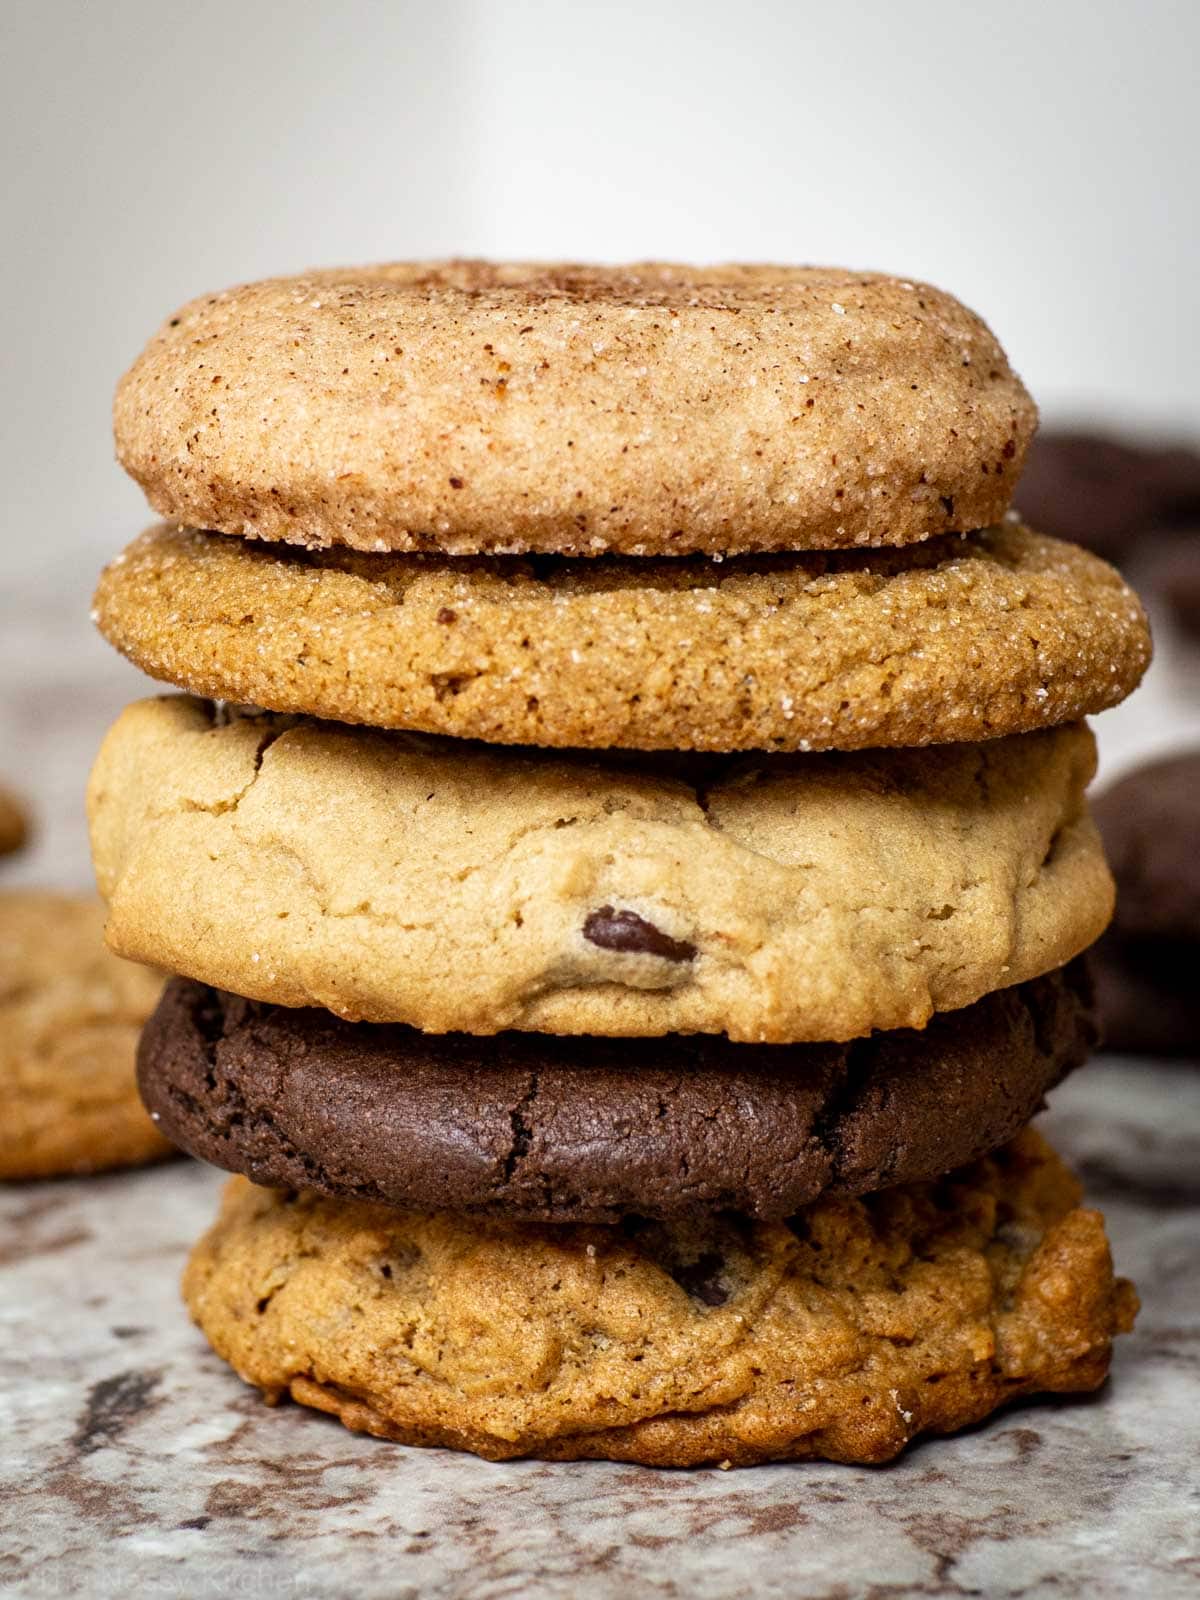 Stack of 5 cookies with an oatmeal cookie on the bottom, then a chocolate cookie, chocolate chip cookie, gingersnaps and a snickerdoodle on top.